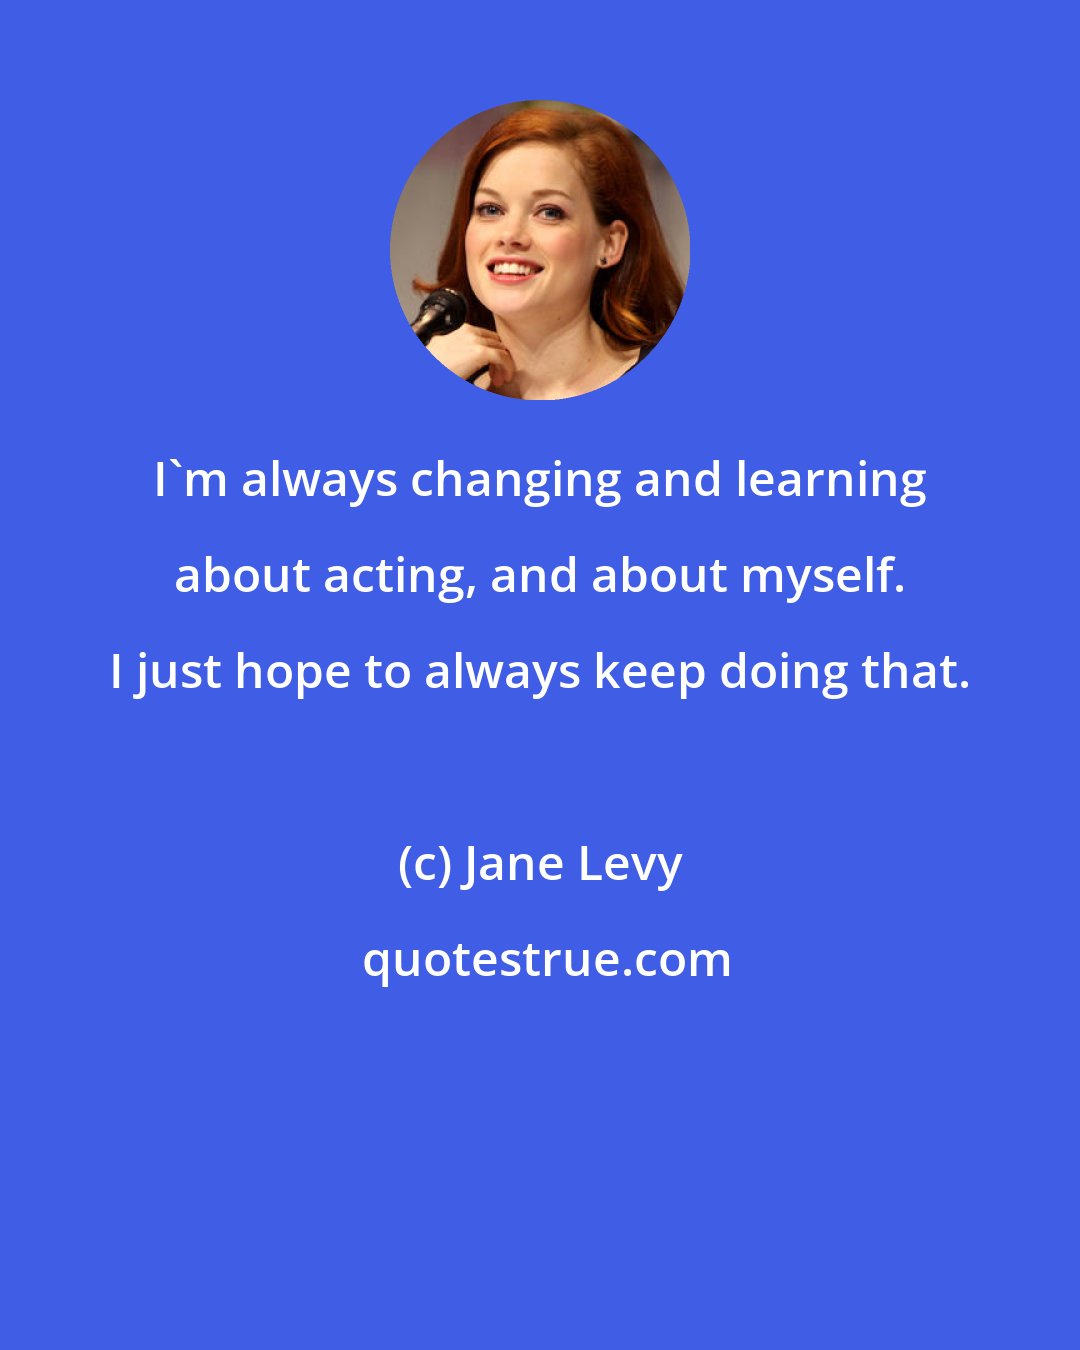 Jane Levy: I'm always changing and learning about acting, and about myself. I just hope to always keep doing that.